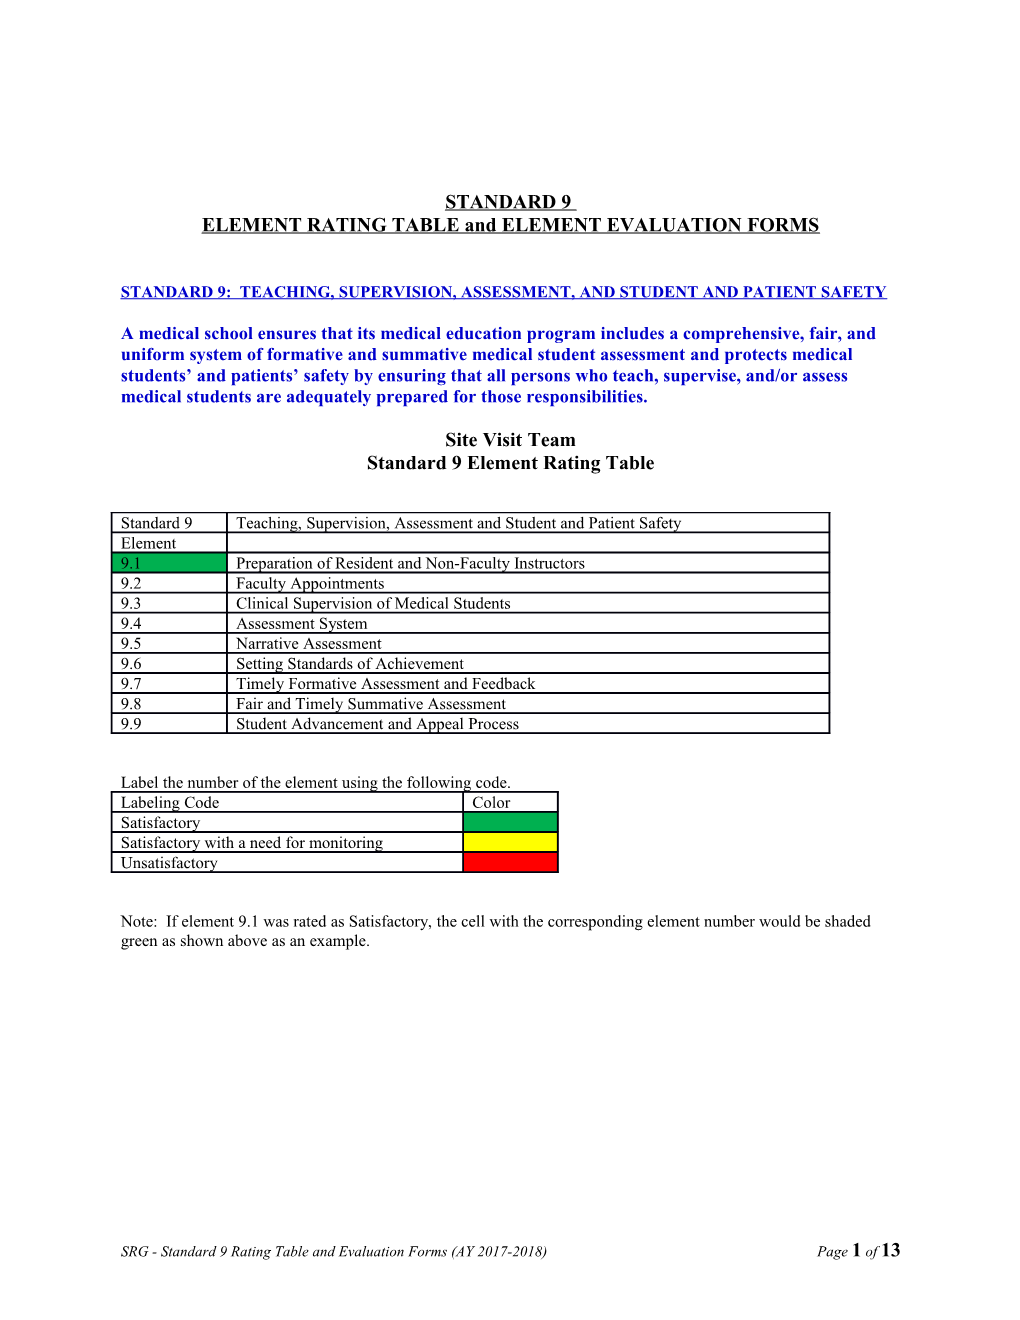 ELEMENT RATING TABLE and ELEMENT EVALUATION FORMS